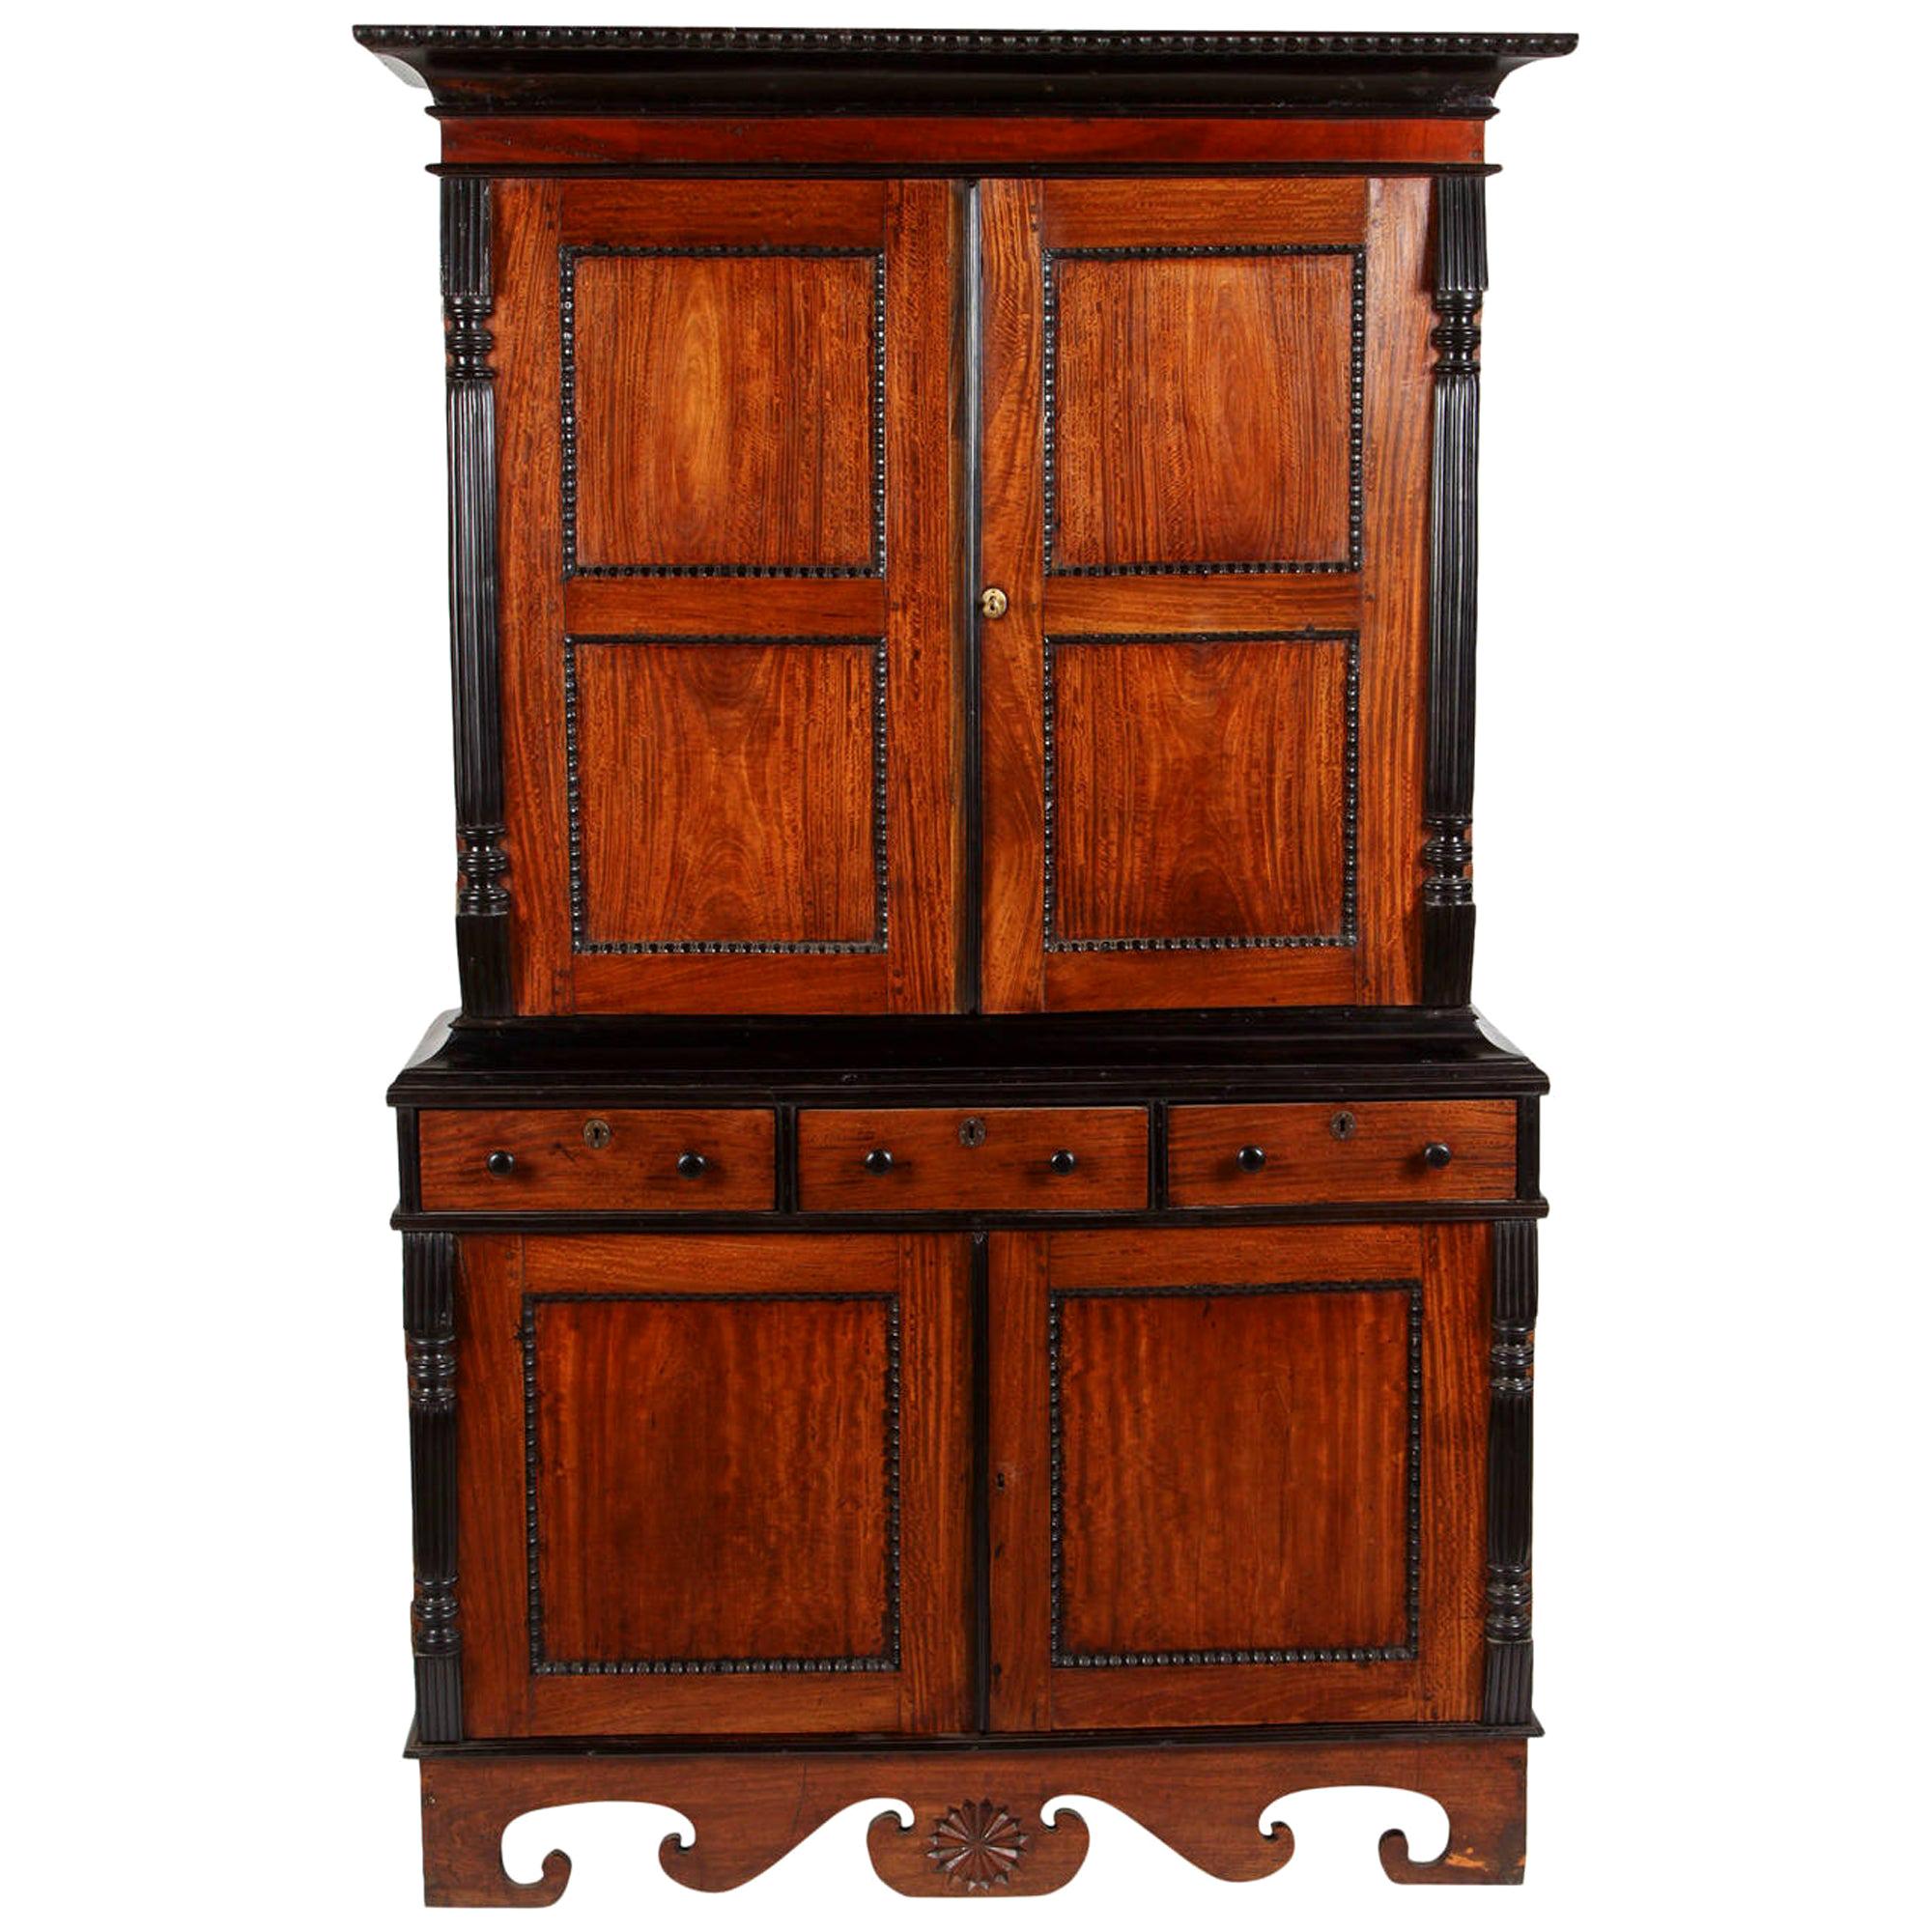 19th Century British Colonial Ceylonese Satinwood and Ebony Cabinet For Sale